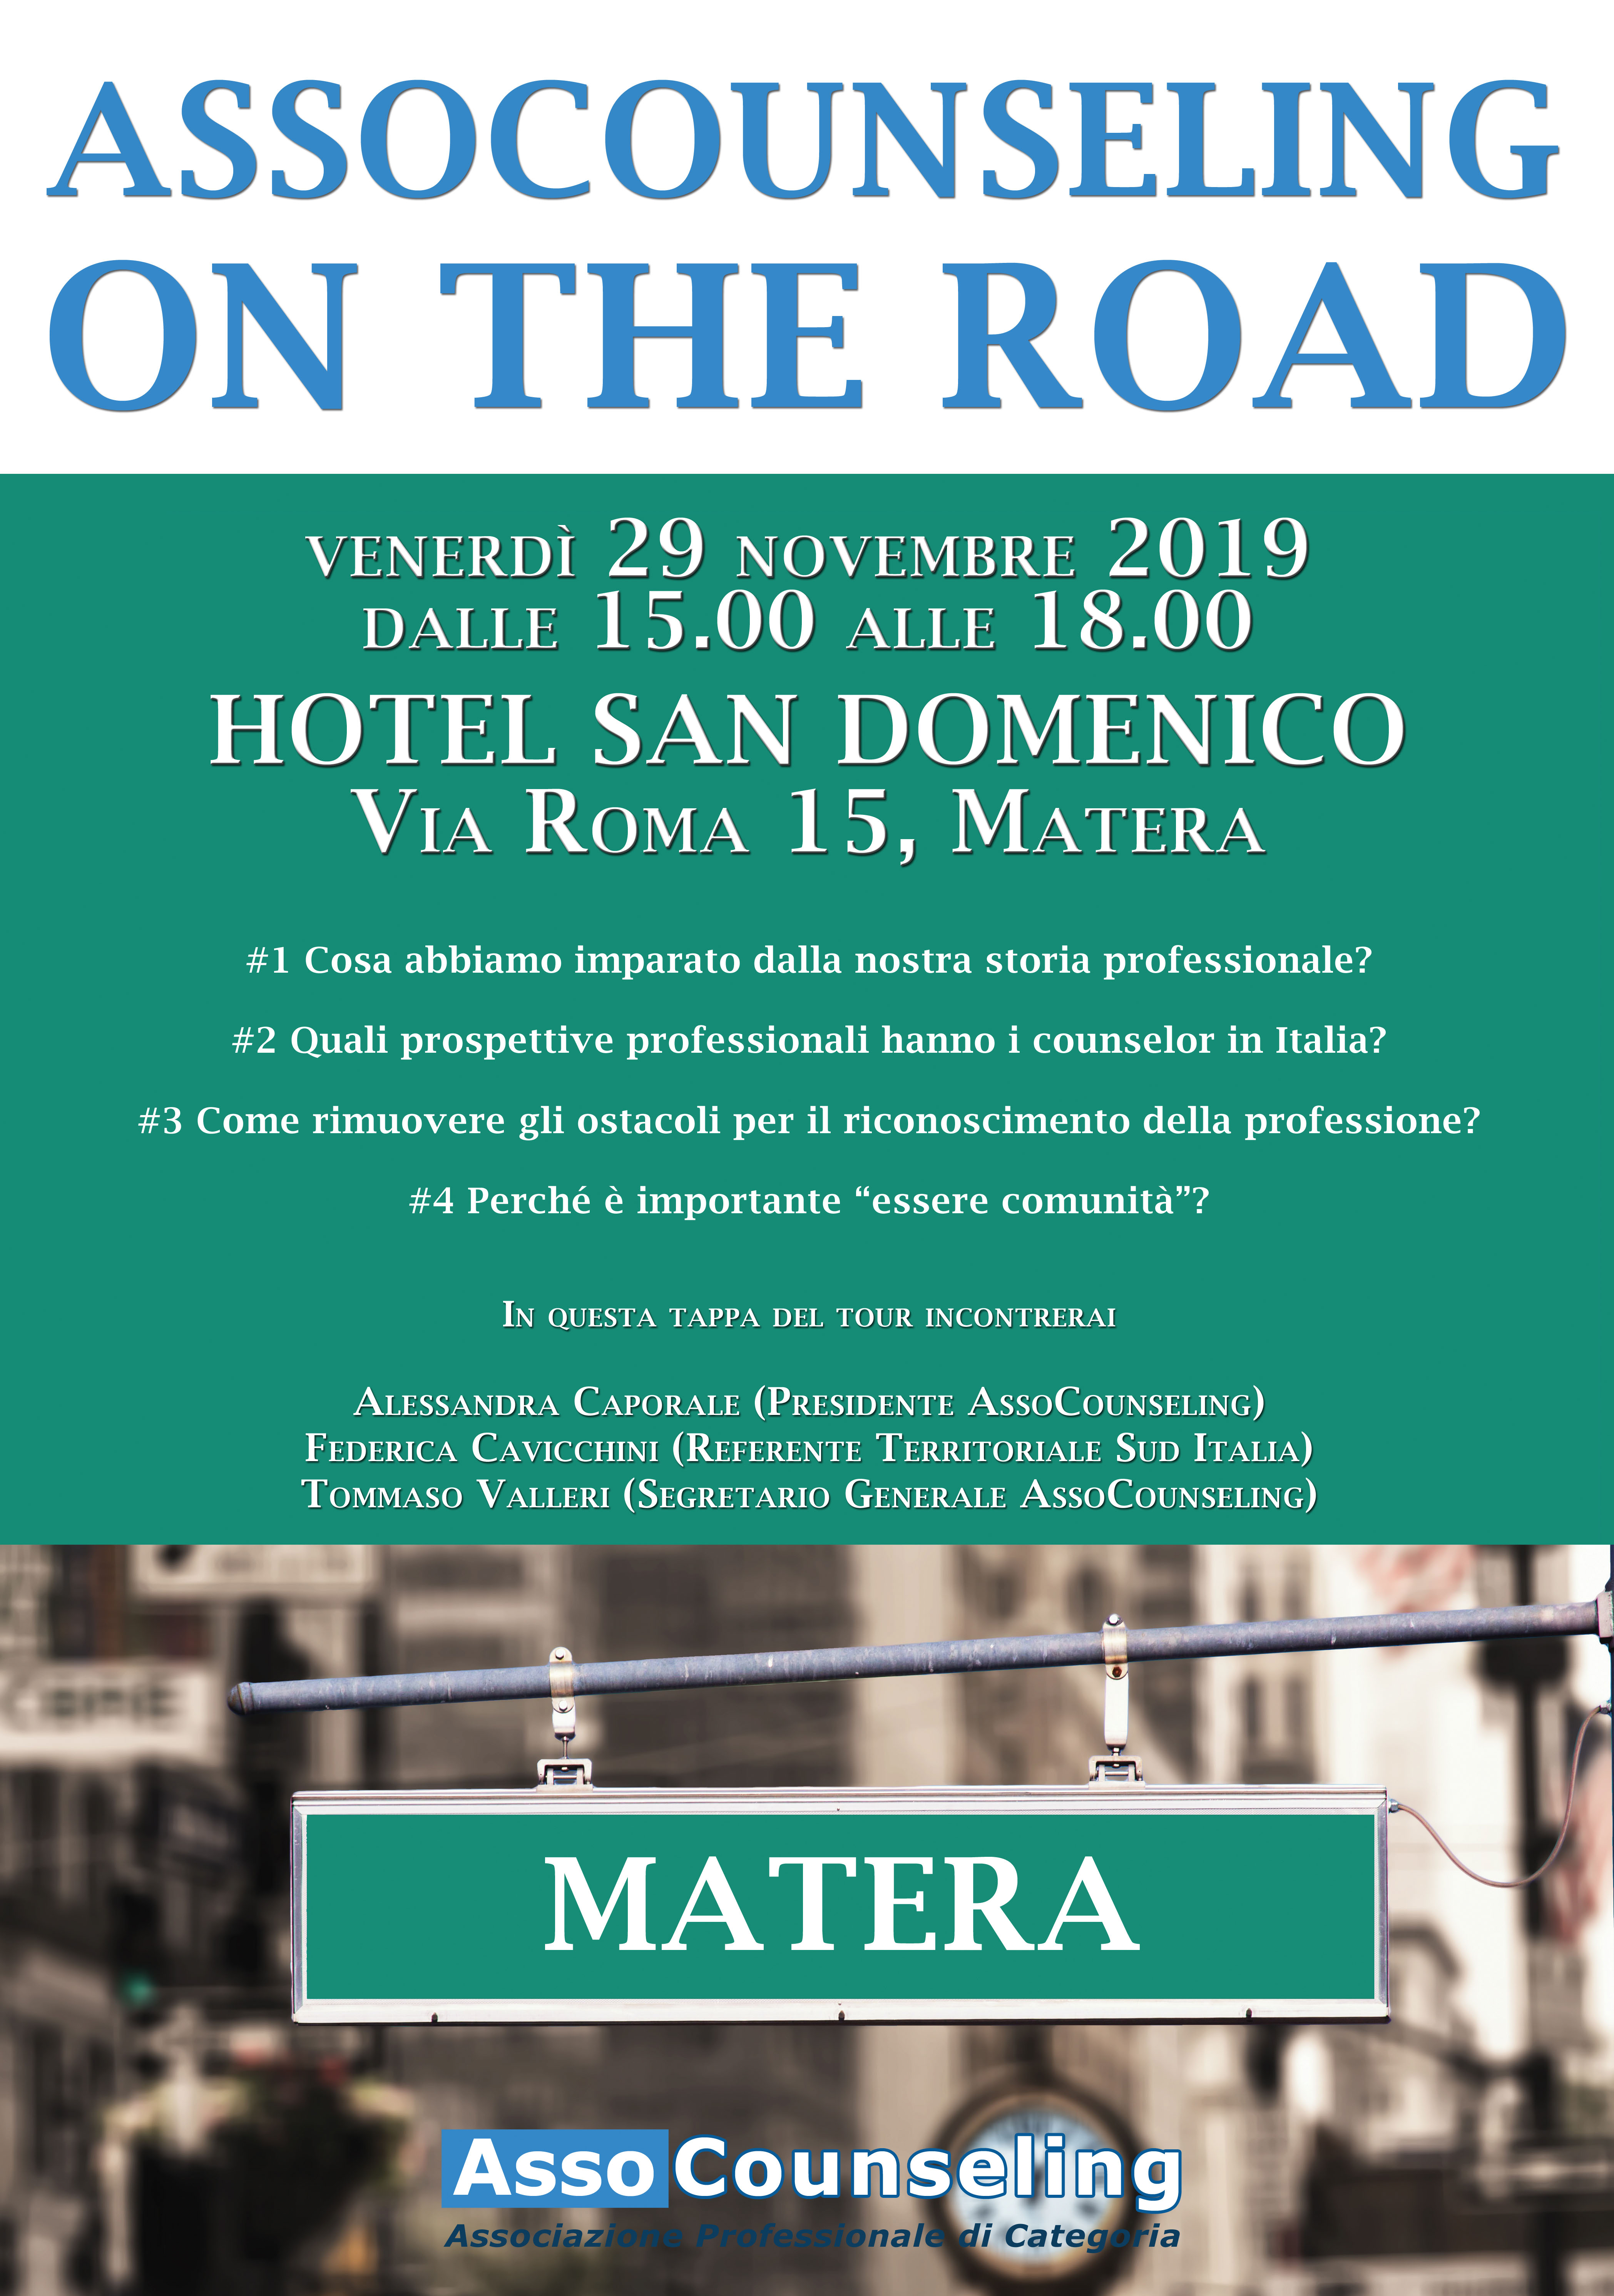 AssoCounseling on the road - Matera